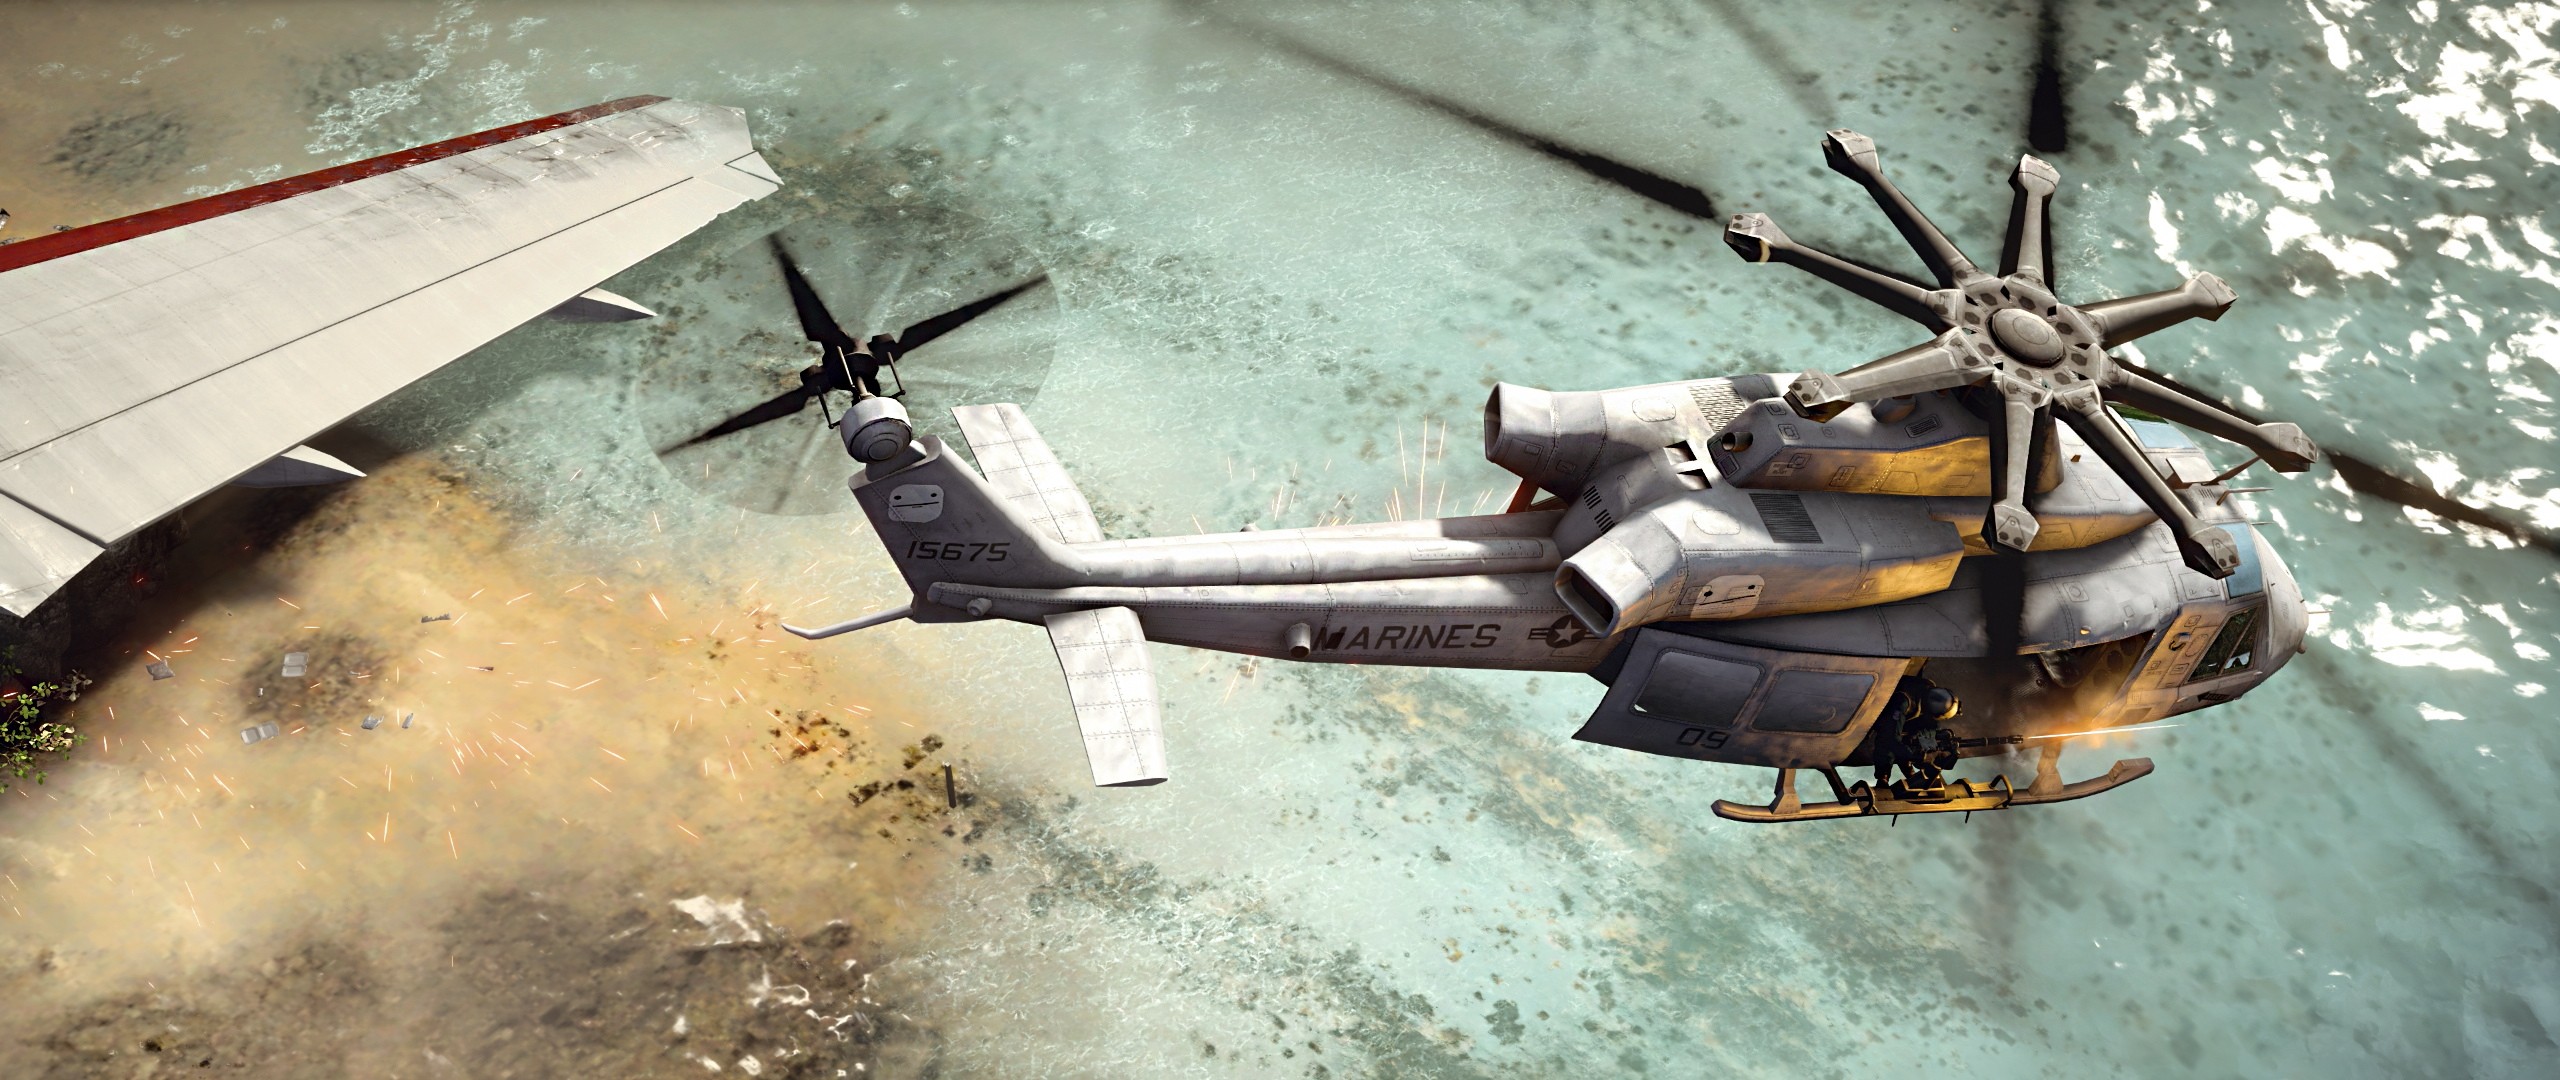 helicopters, UH Aerial view, Beach, Battlefield 4 Wallpaper HD / Desktop and Mobile Background